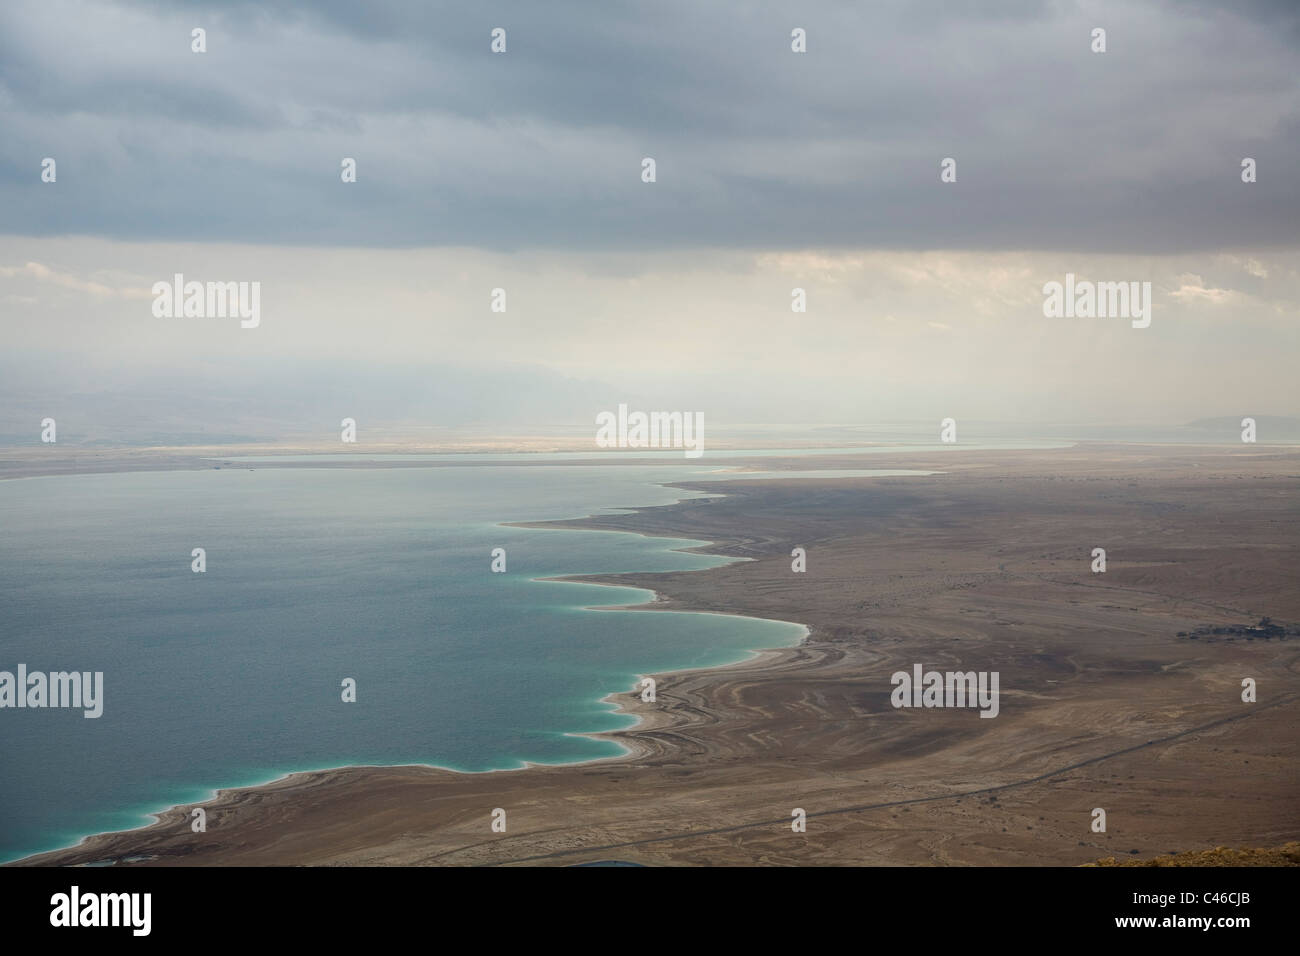 Photograph of the Dead sea in the winter Stock Photo